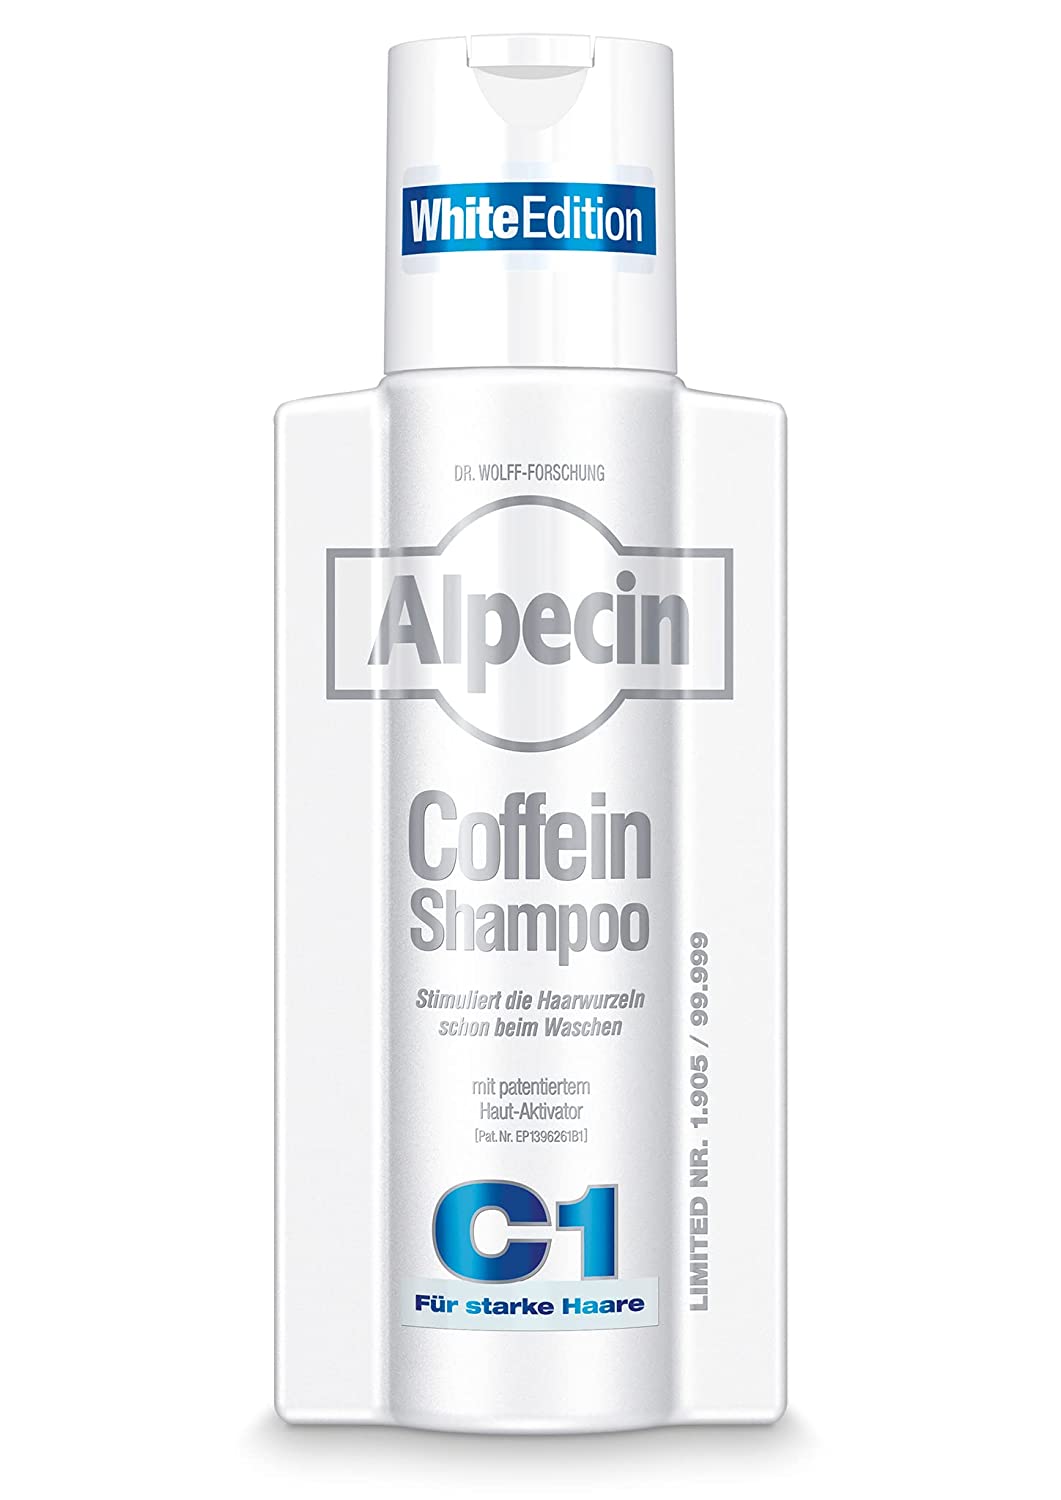 Alpecin Caffeine Shampoo C1 White Edition - 1 x 250 ml - For Strong Hair | Limited Edition with Invigorating Fresh Fragrance | Natural Hair Growth & Hair Care for Men | Made in Germany